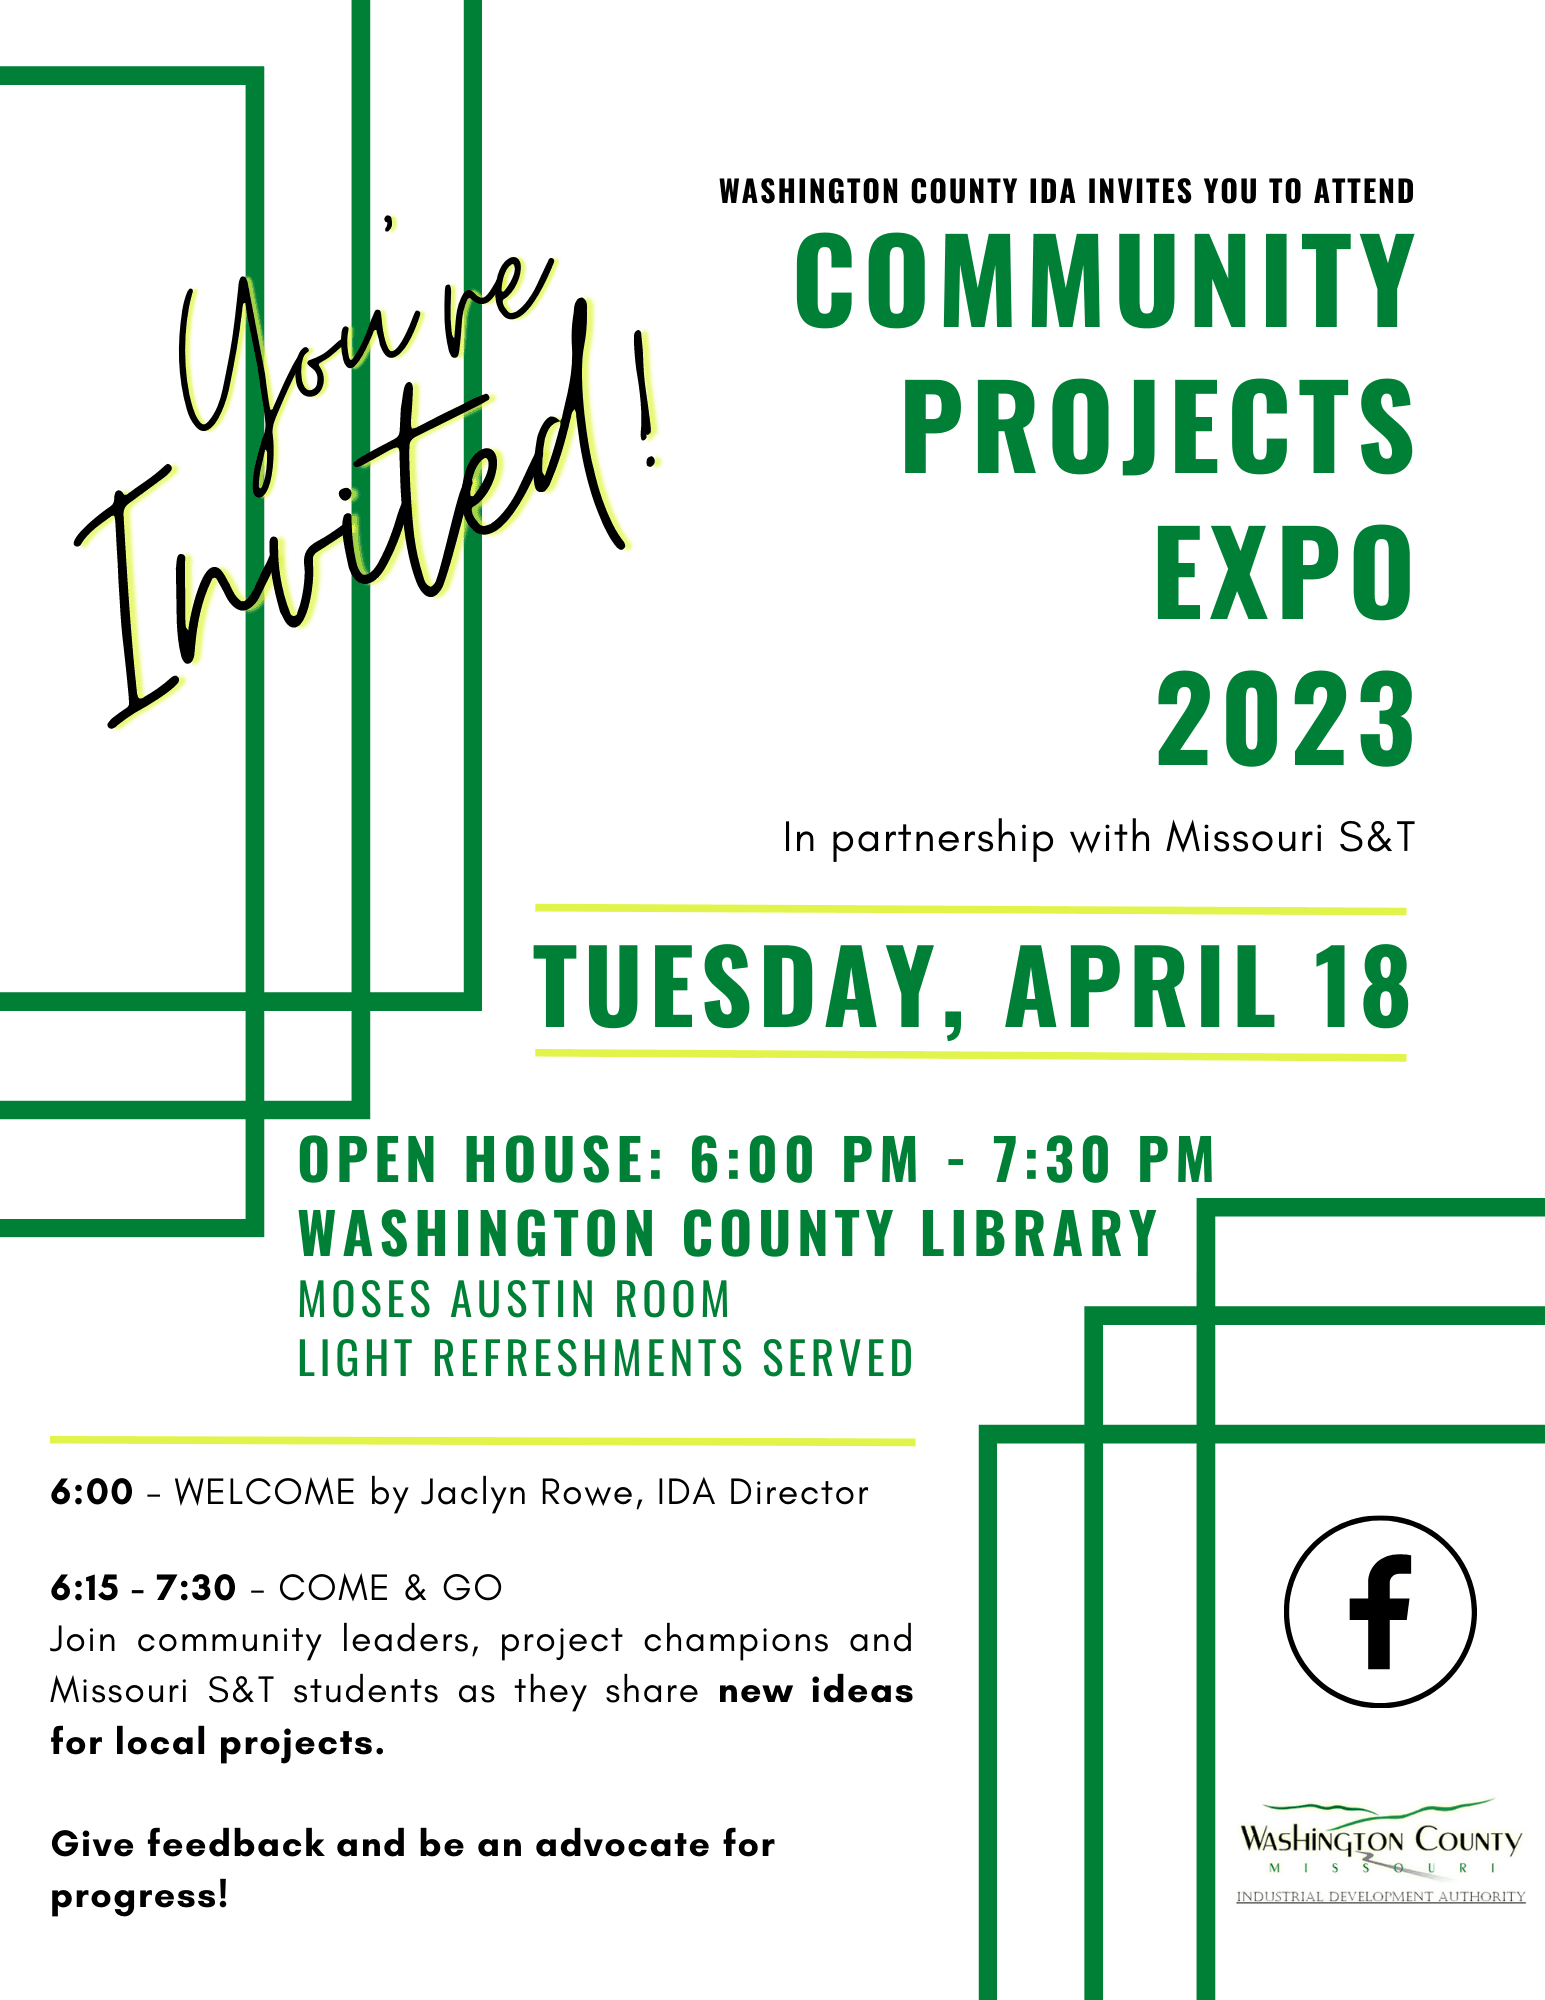 Community Projects Expo 2023 flyer